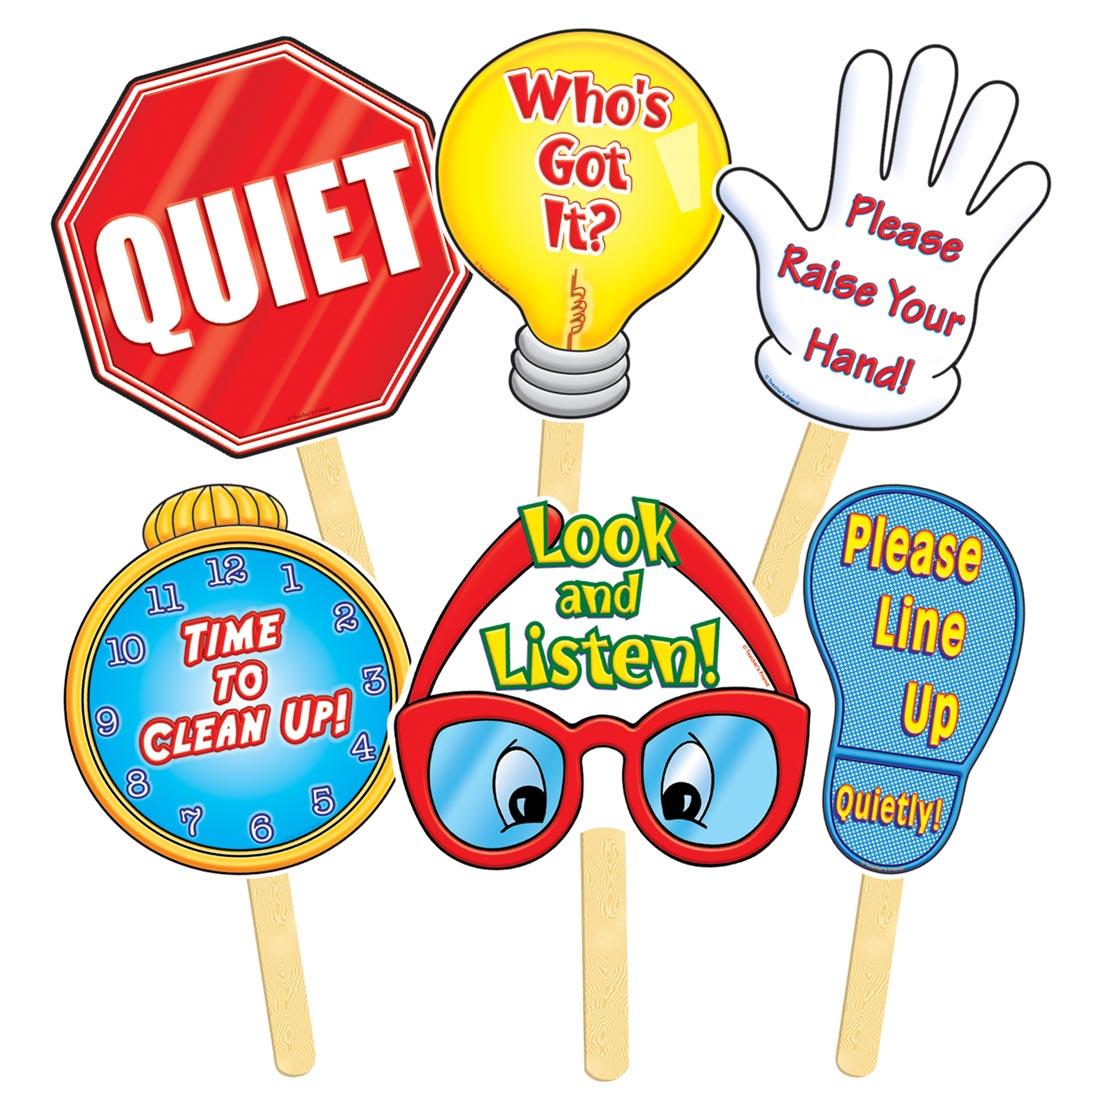 Manage Your Class Signs include Quiet, Who's Got It? and Please Raise Your Hand!